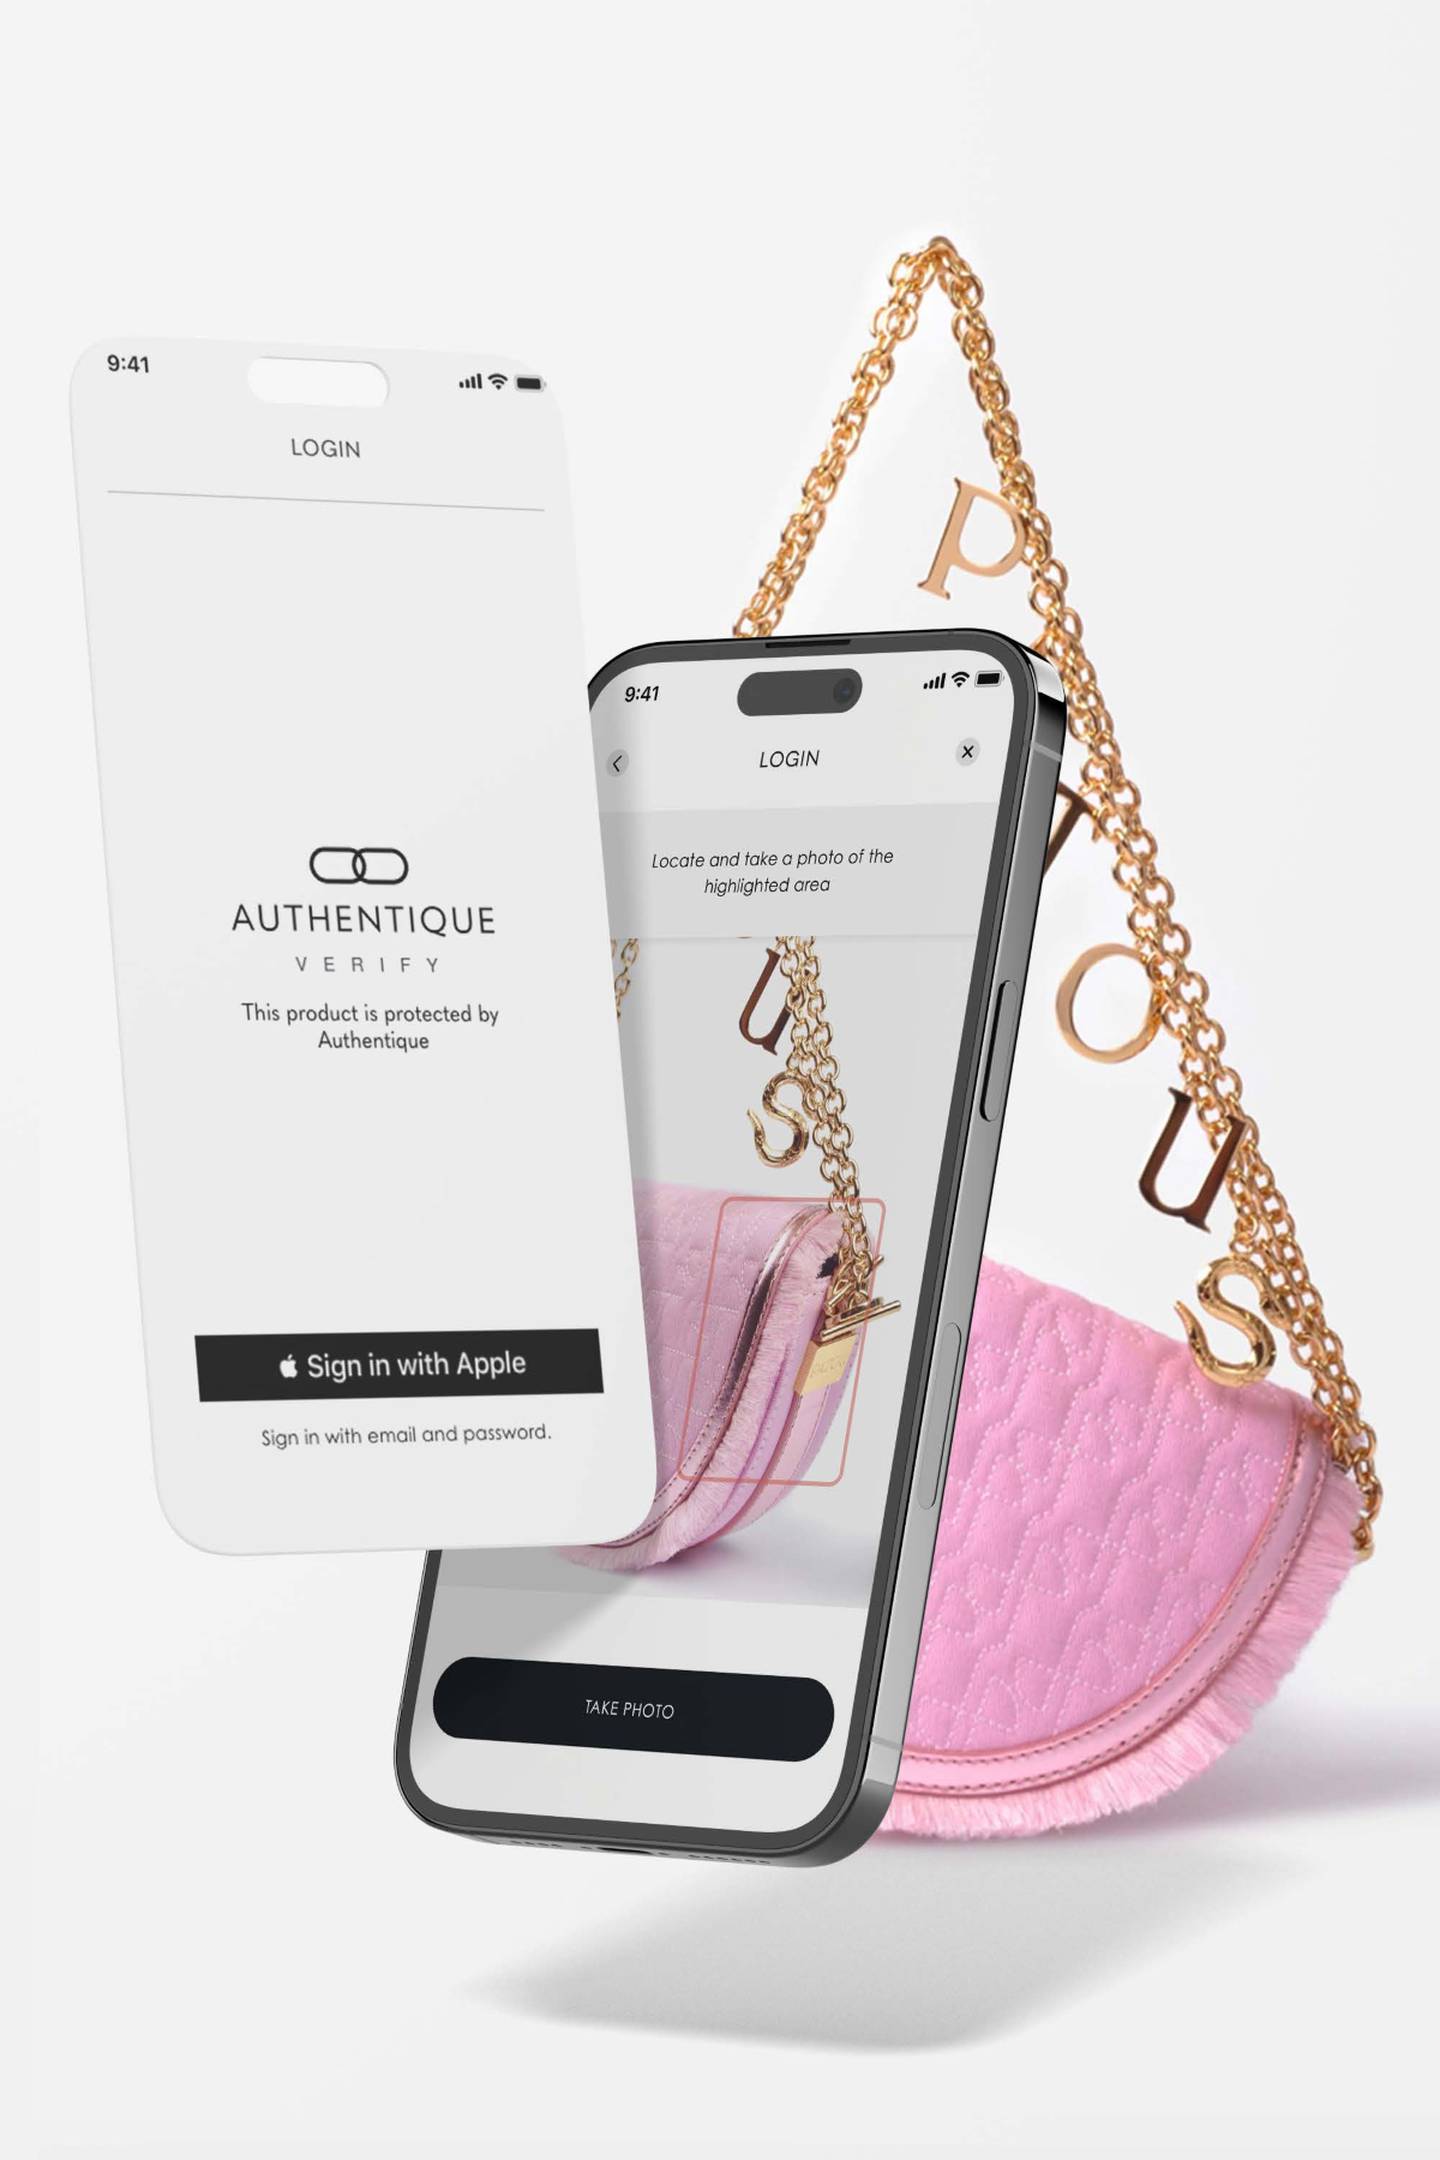 An illustration shows an iPhone with the Authentique app open and the camera pointed at a highlighted area on a pink Patou bag.